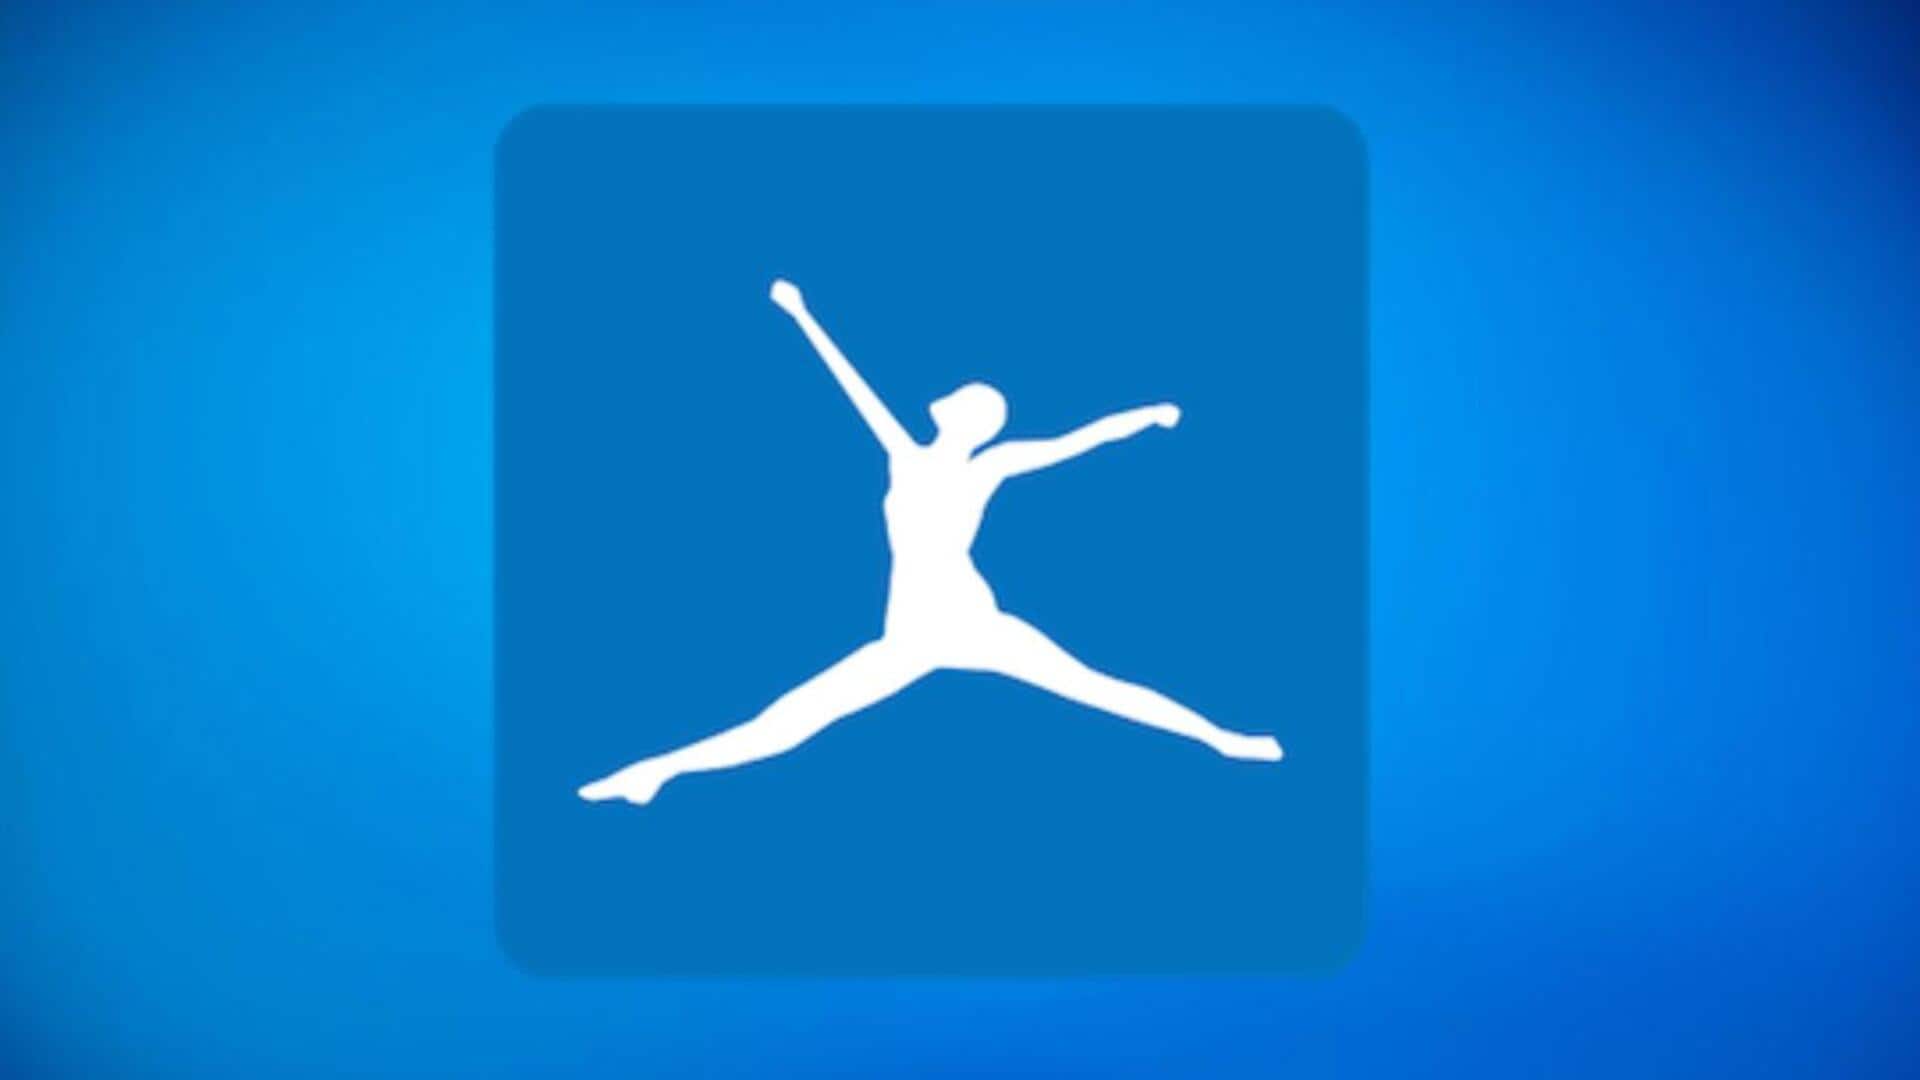 Tailor your fitness journey with MyFitnessPal app: Here's how